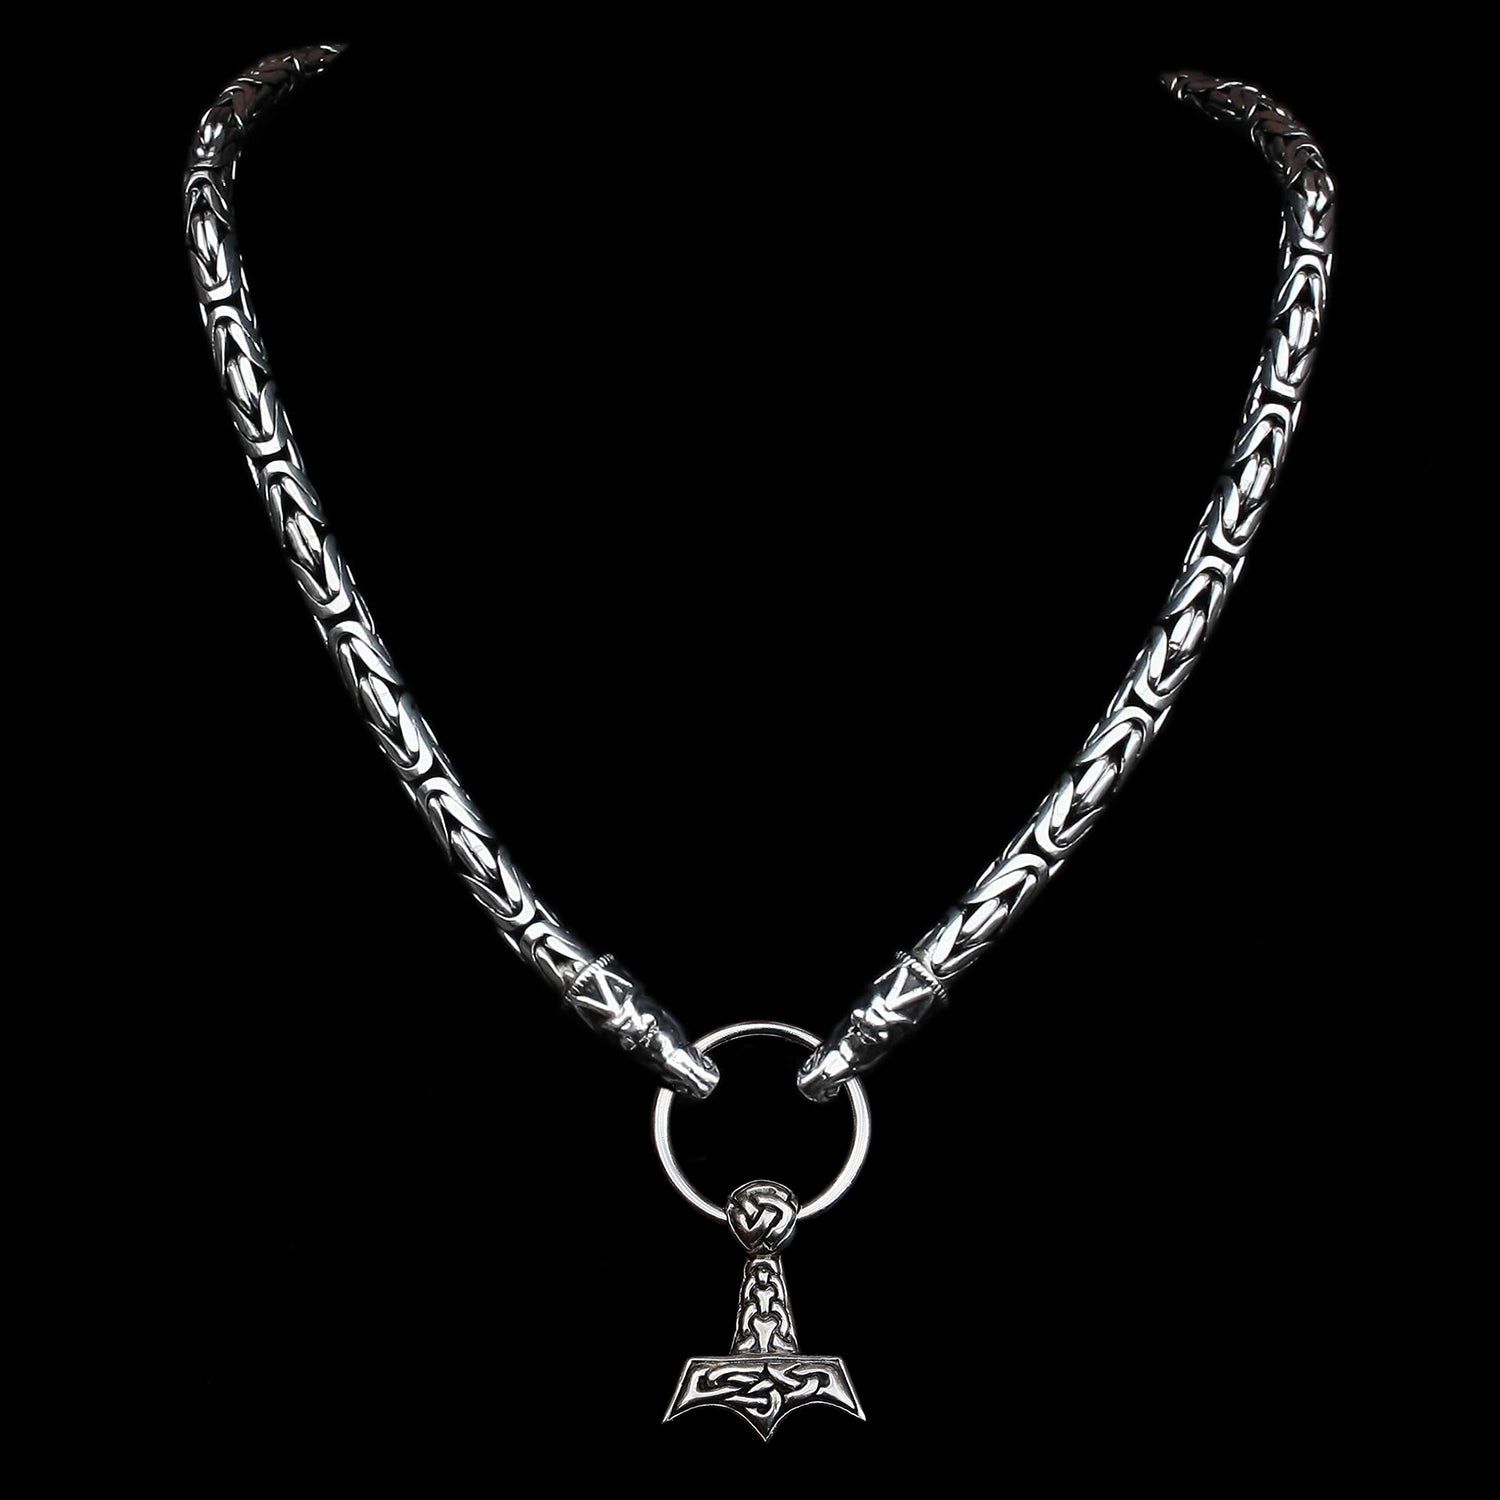 8mm Thick Silver King Chain Thors Hammer Necklace - Gotland Dragon Heads - Knotwork Thors Hammer